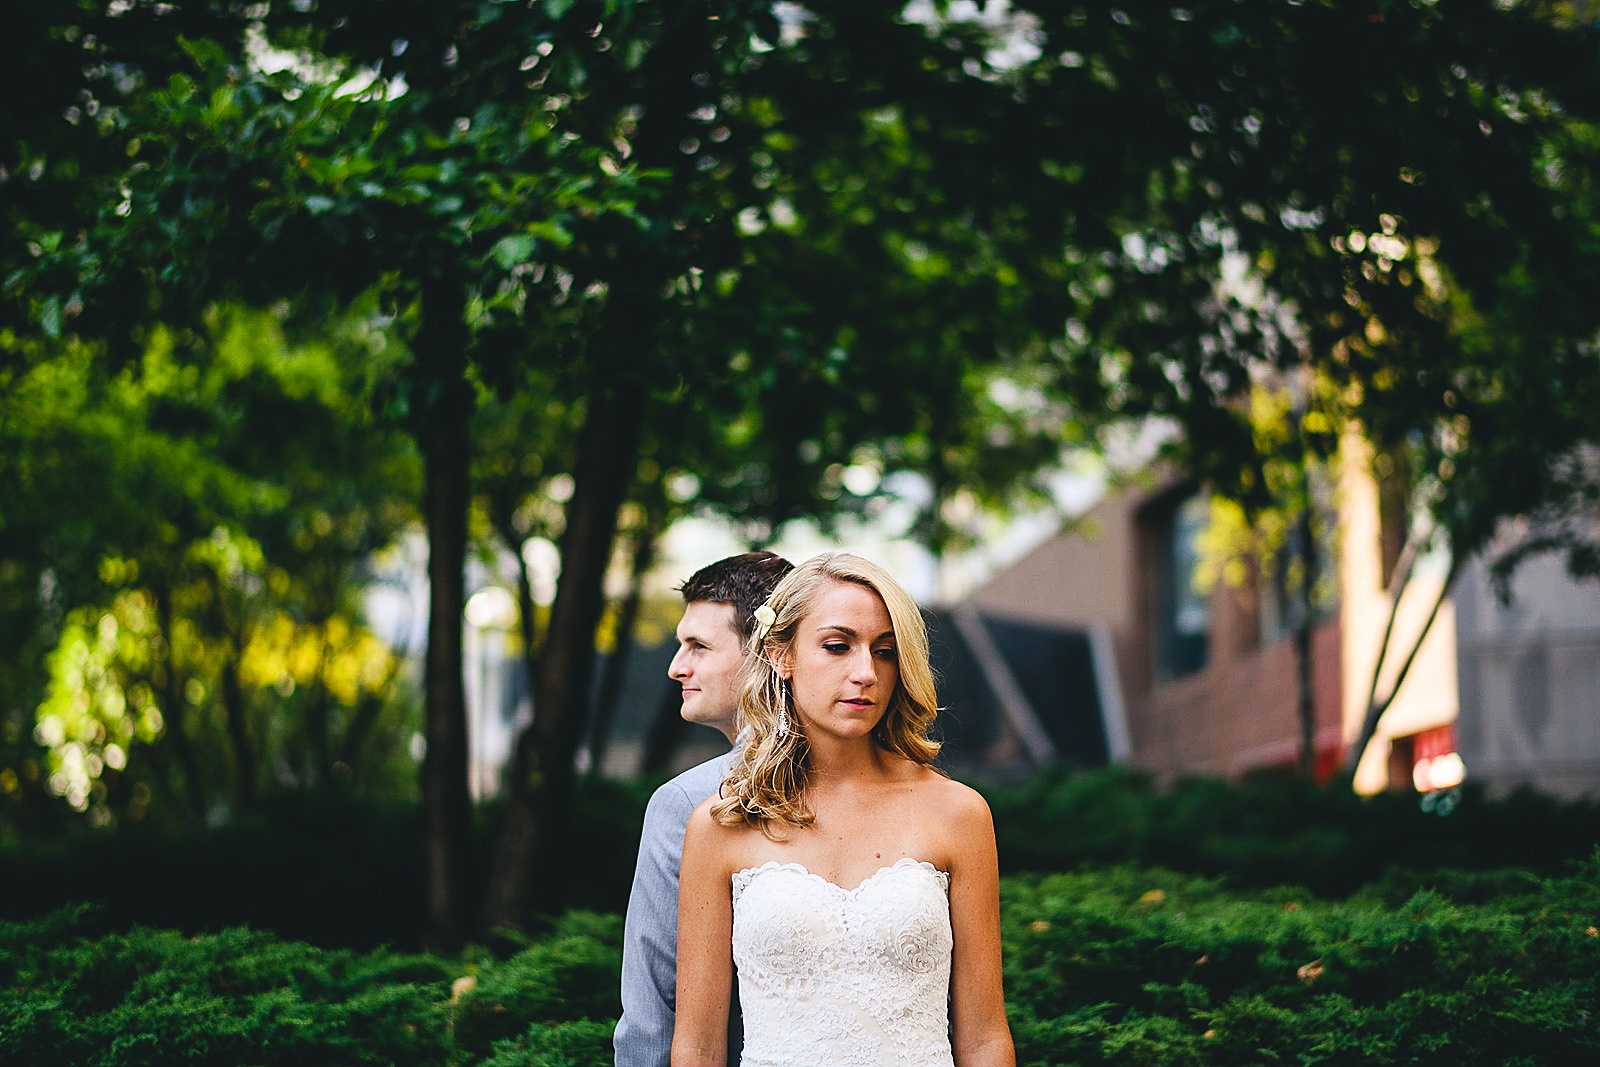 32 best bride and groom wedding photos in chicago - Audrey + Jake's Beautiful Chicago Wedding at Chez